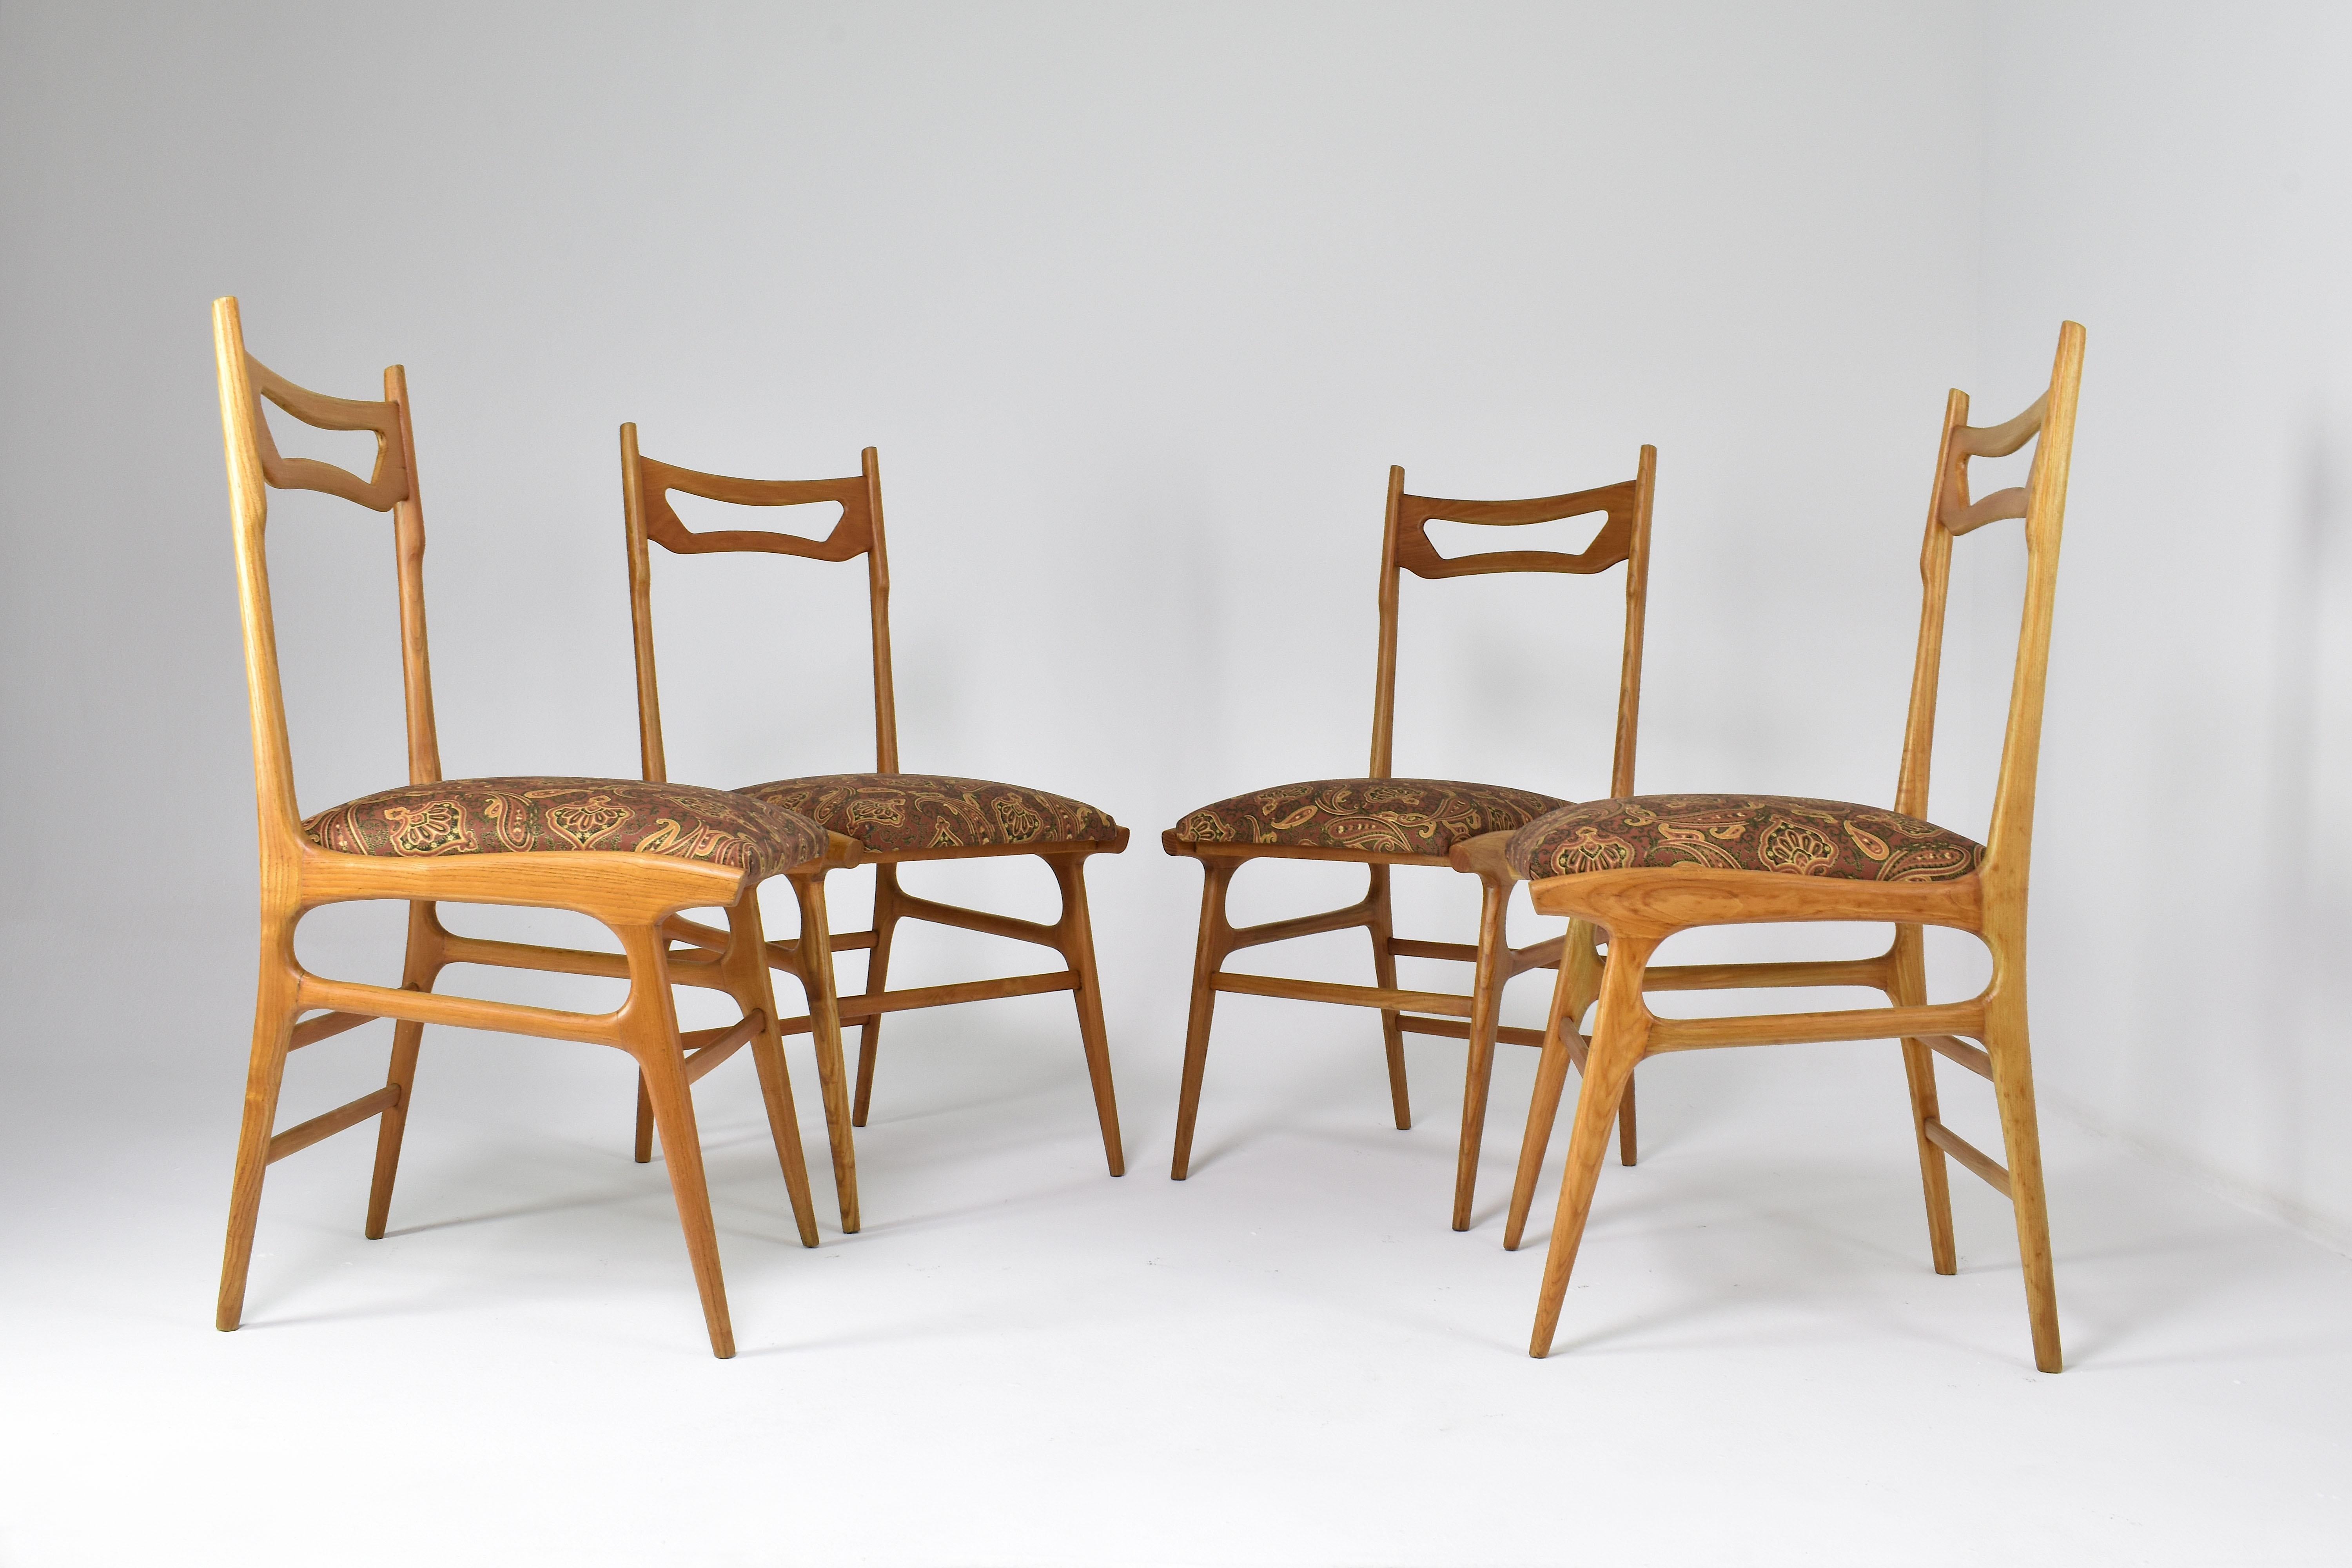 Italian Vintage Wooden Dining Chairs, Set of Four, 1950s For Sale 10